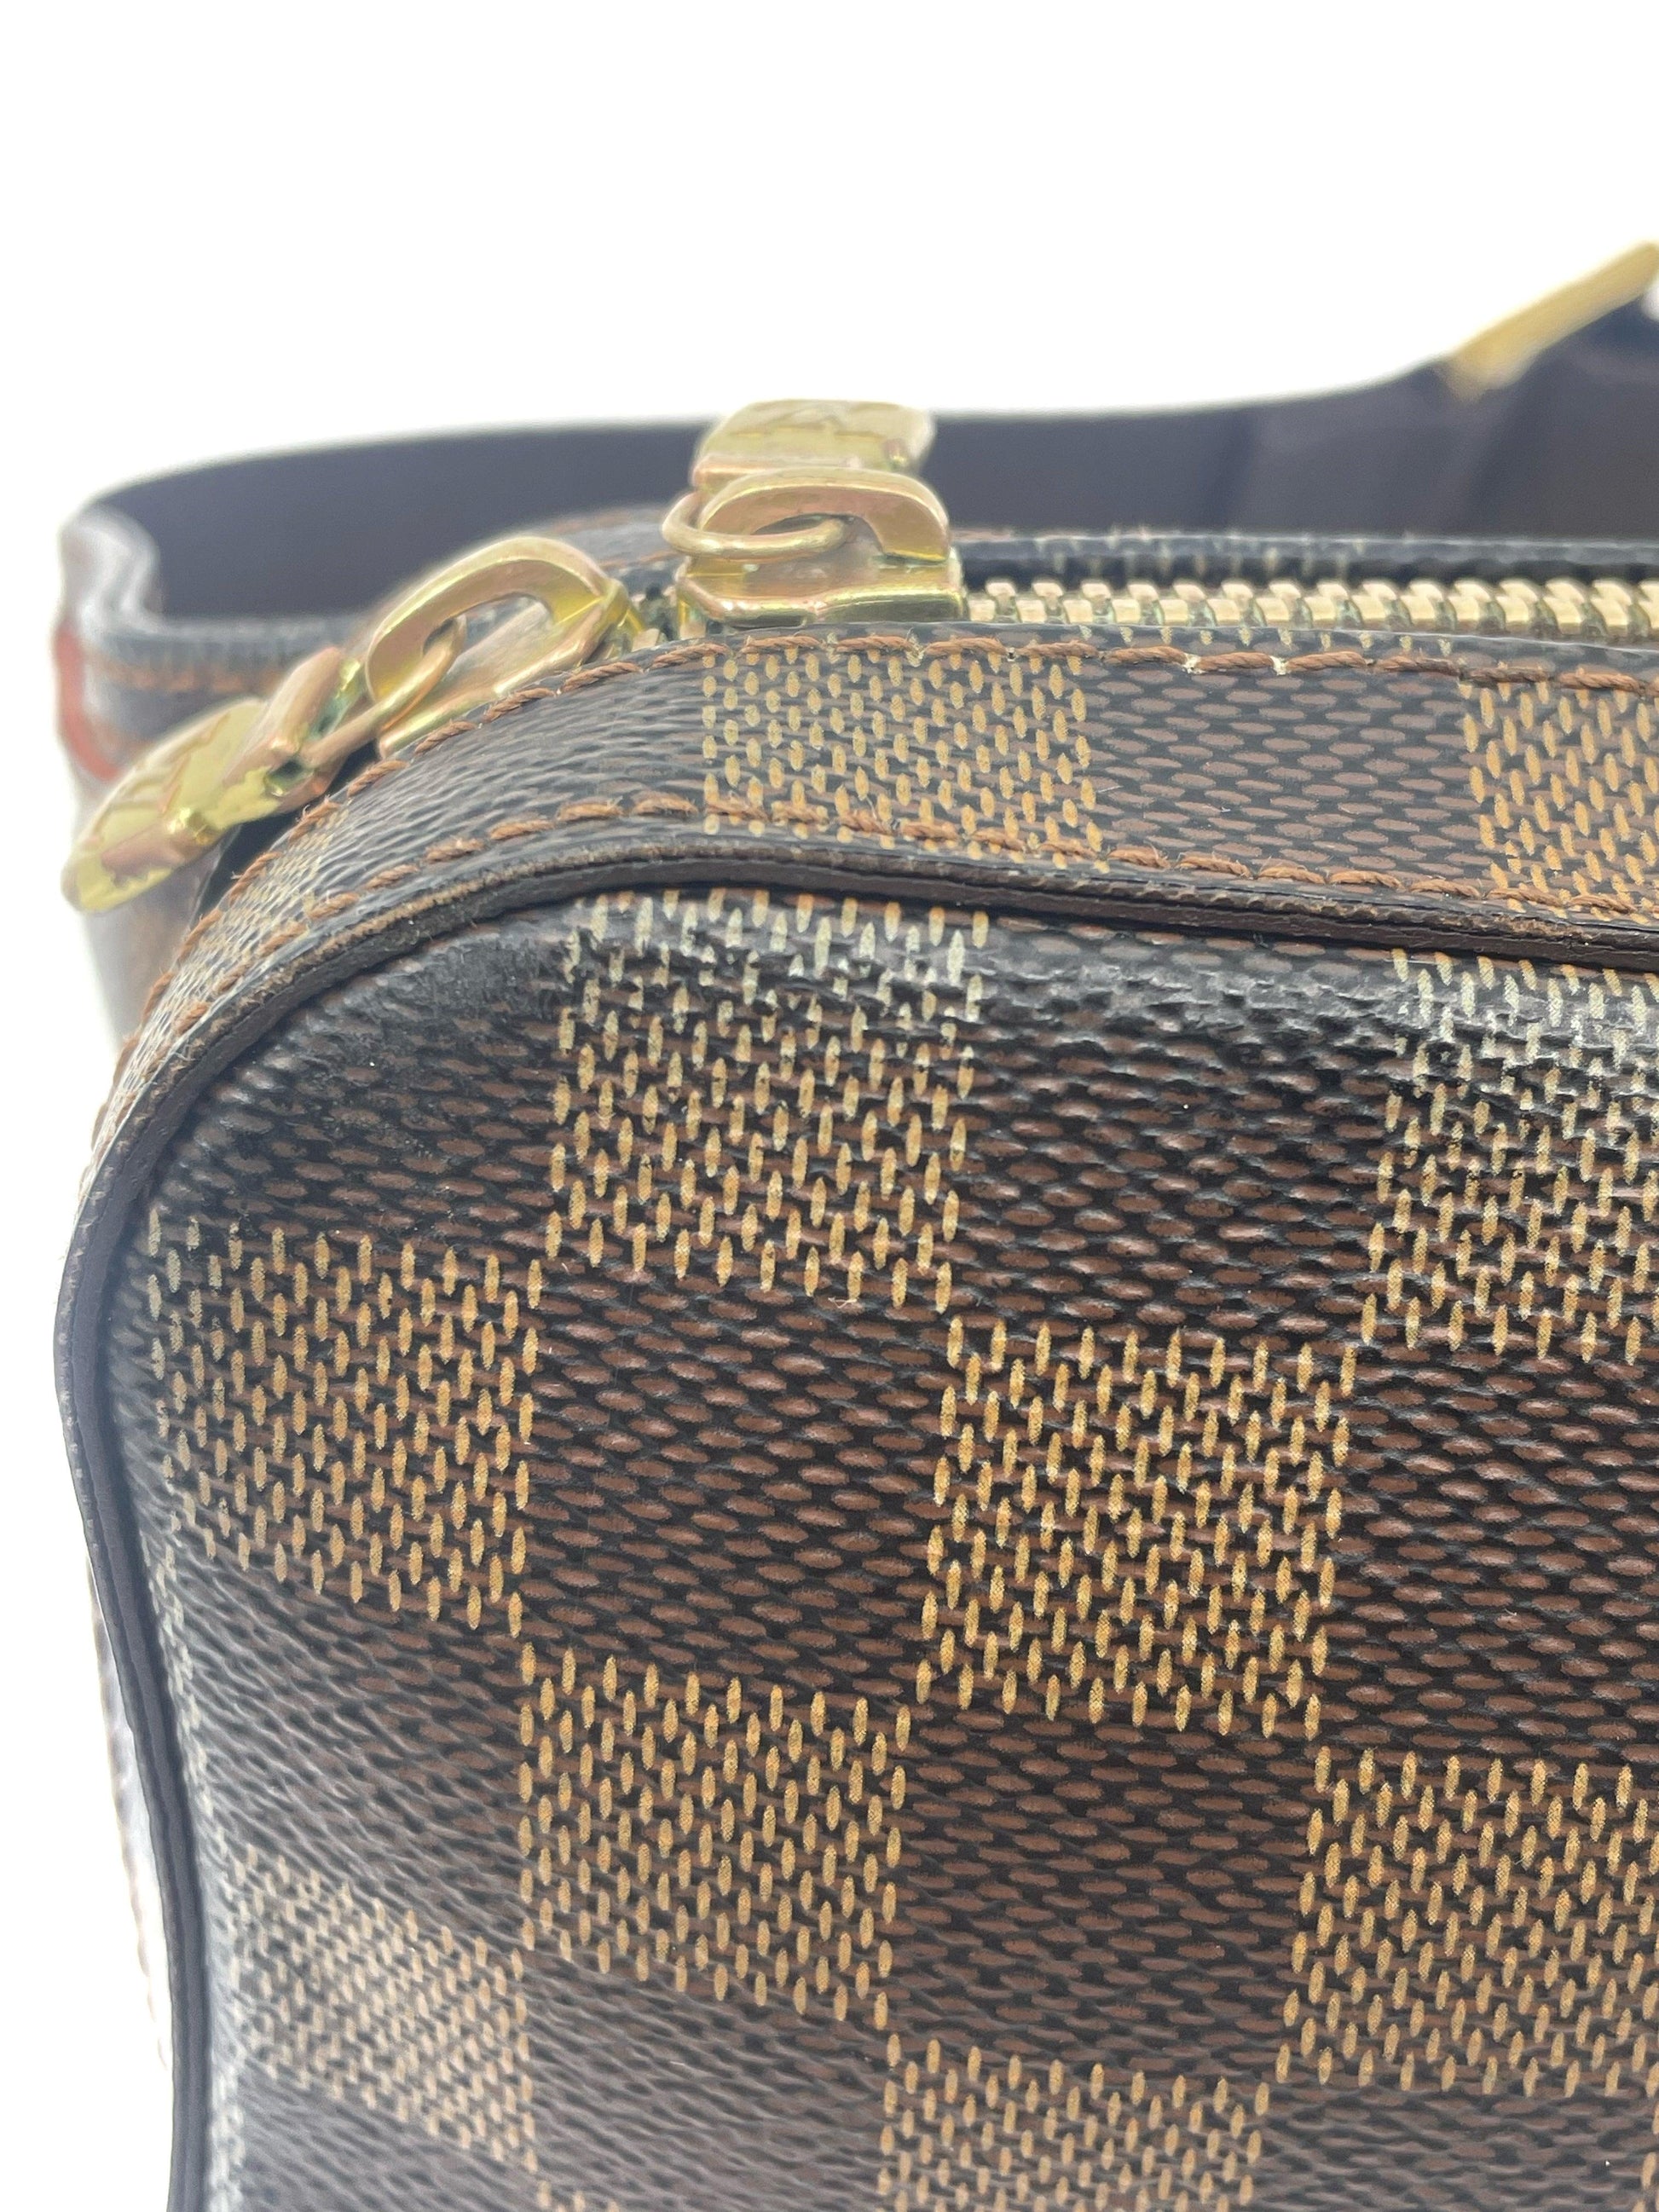 LOUIS VUITTON SPEEDY 30 DAMIER EBENE REVIEW + WHAT'S IN MY BAG?